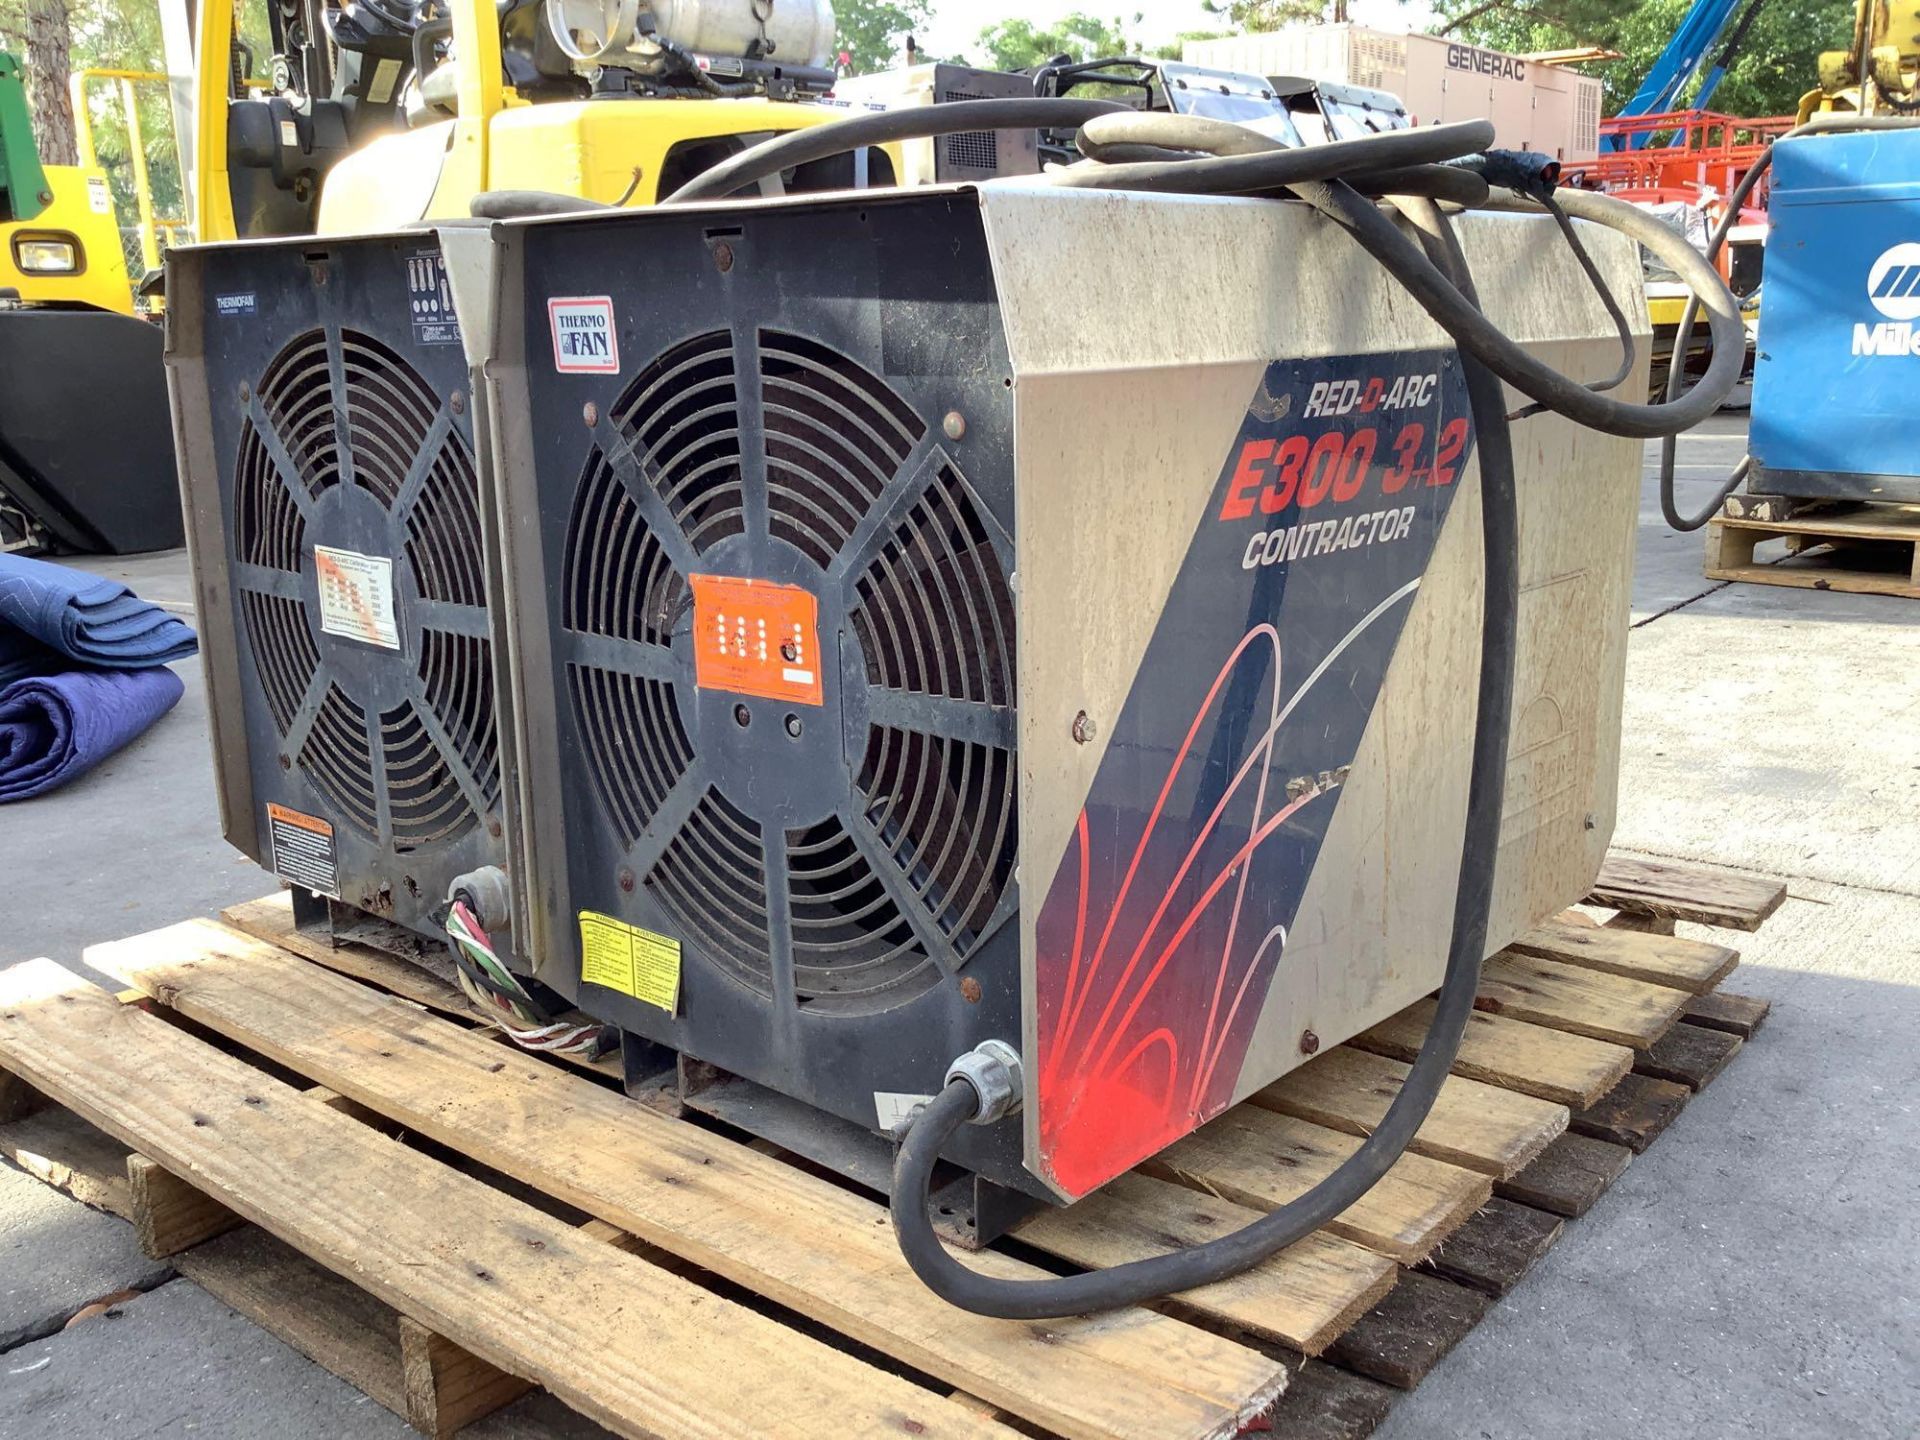 2 ELECTRIC RED-D-ARC E300 3+2 CONTRACTOR WELDERS/ THERMOFANS ,APPROX 480 VOLTS - Image 5 of 7